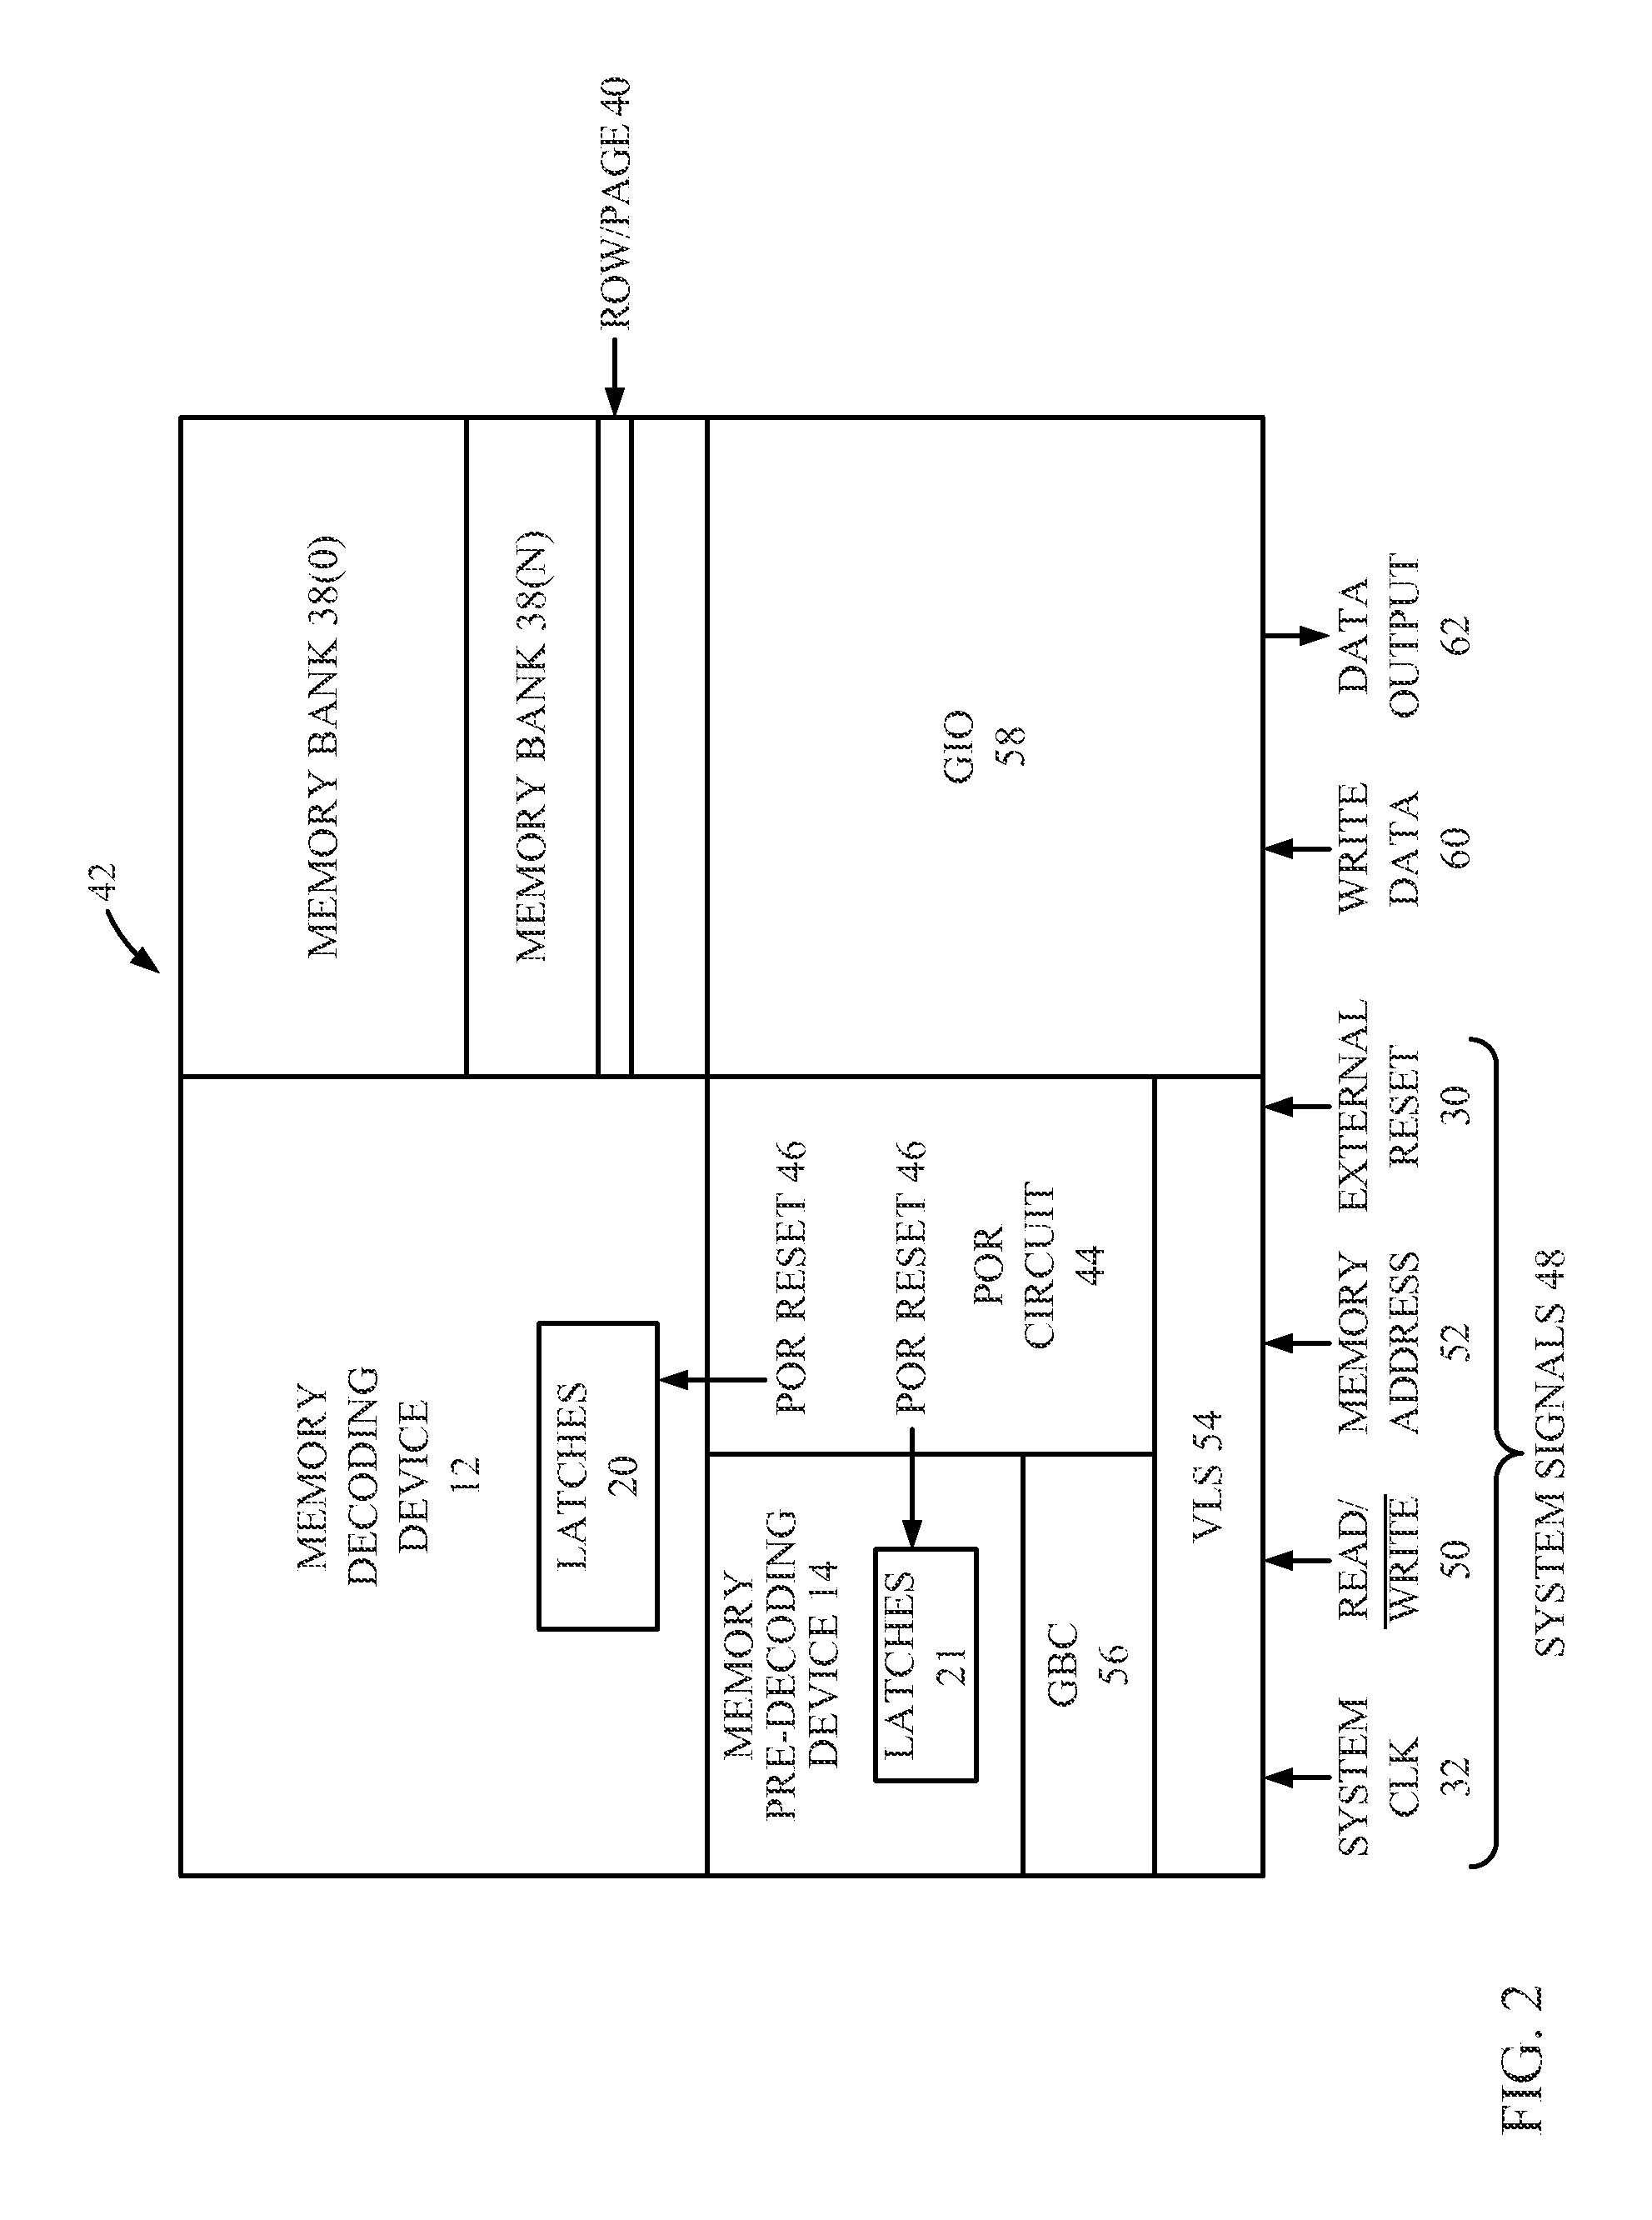 Power-on-reset (POR) circuits for resetting memory devices, and related circuits, systems, and methods